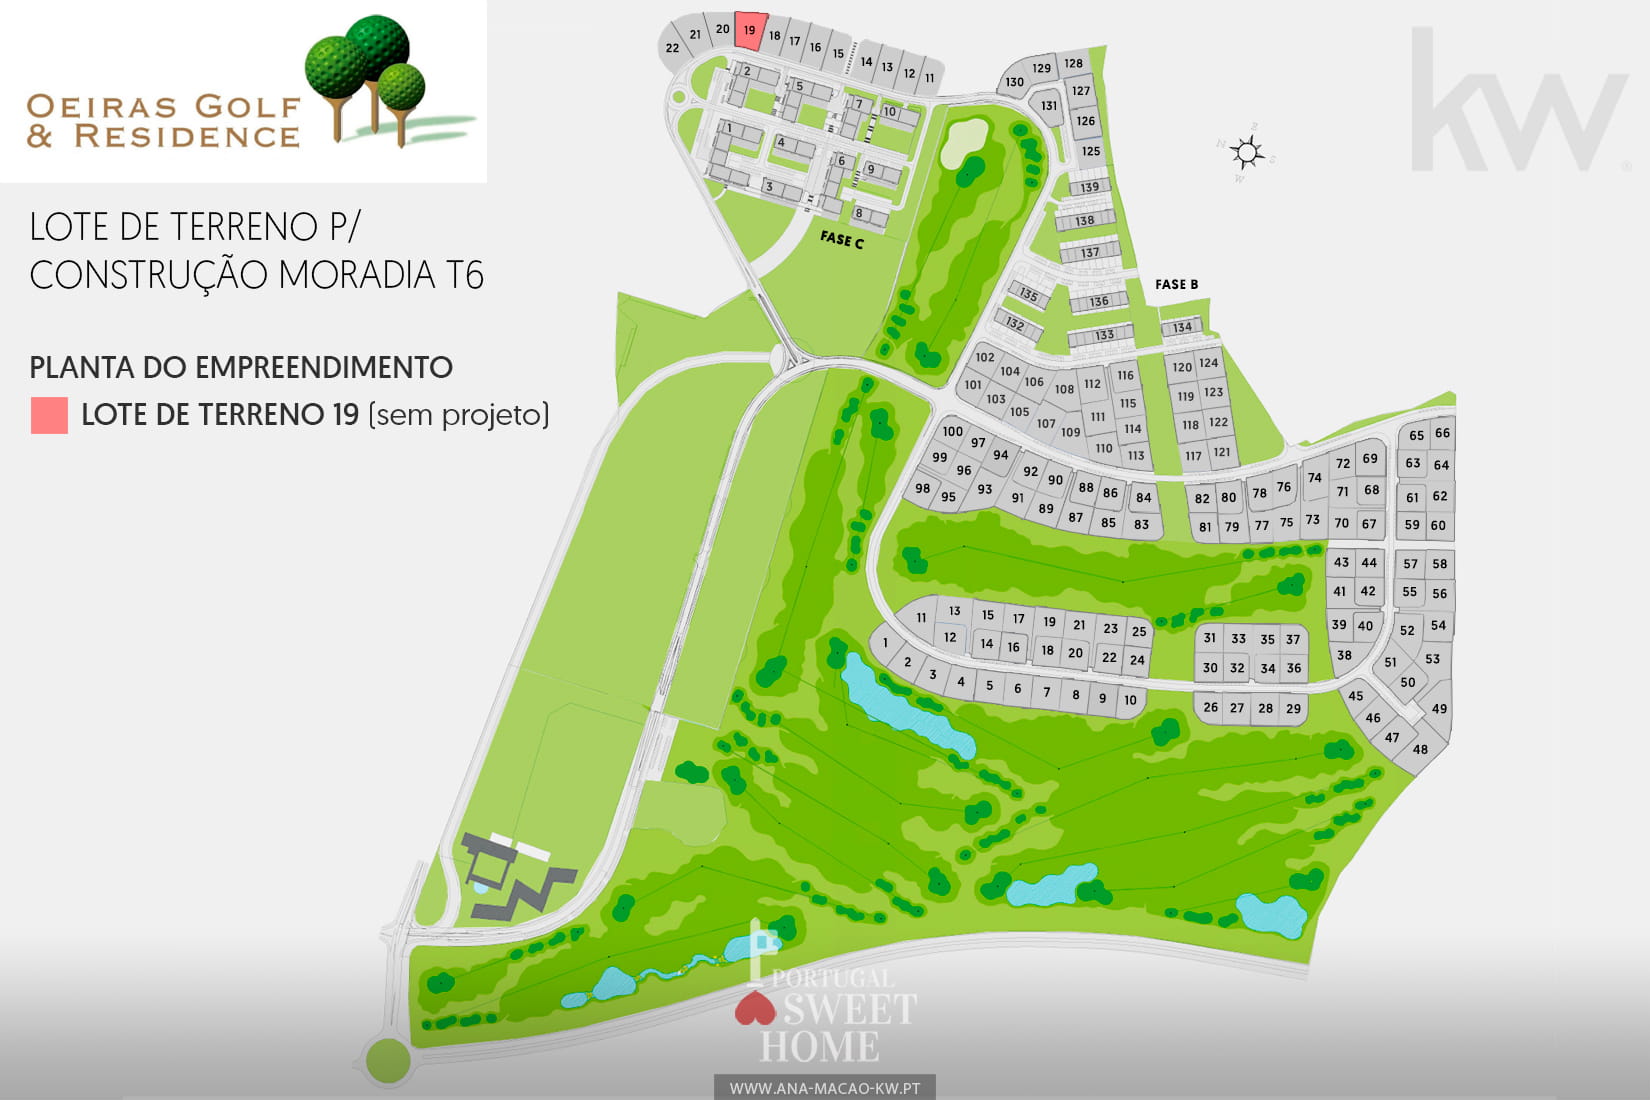 Plan of Oeiras Golf & Residence and location of Plot 19-Phase C